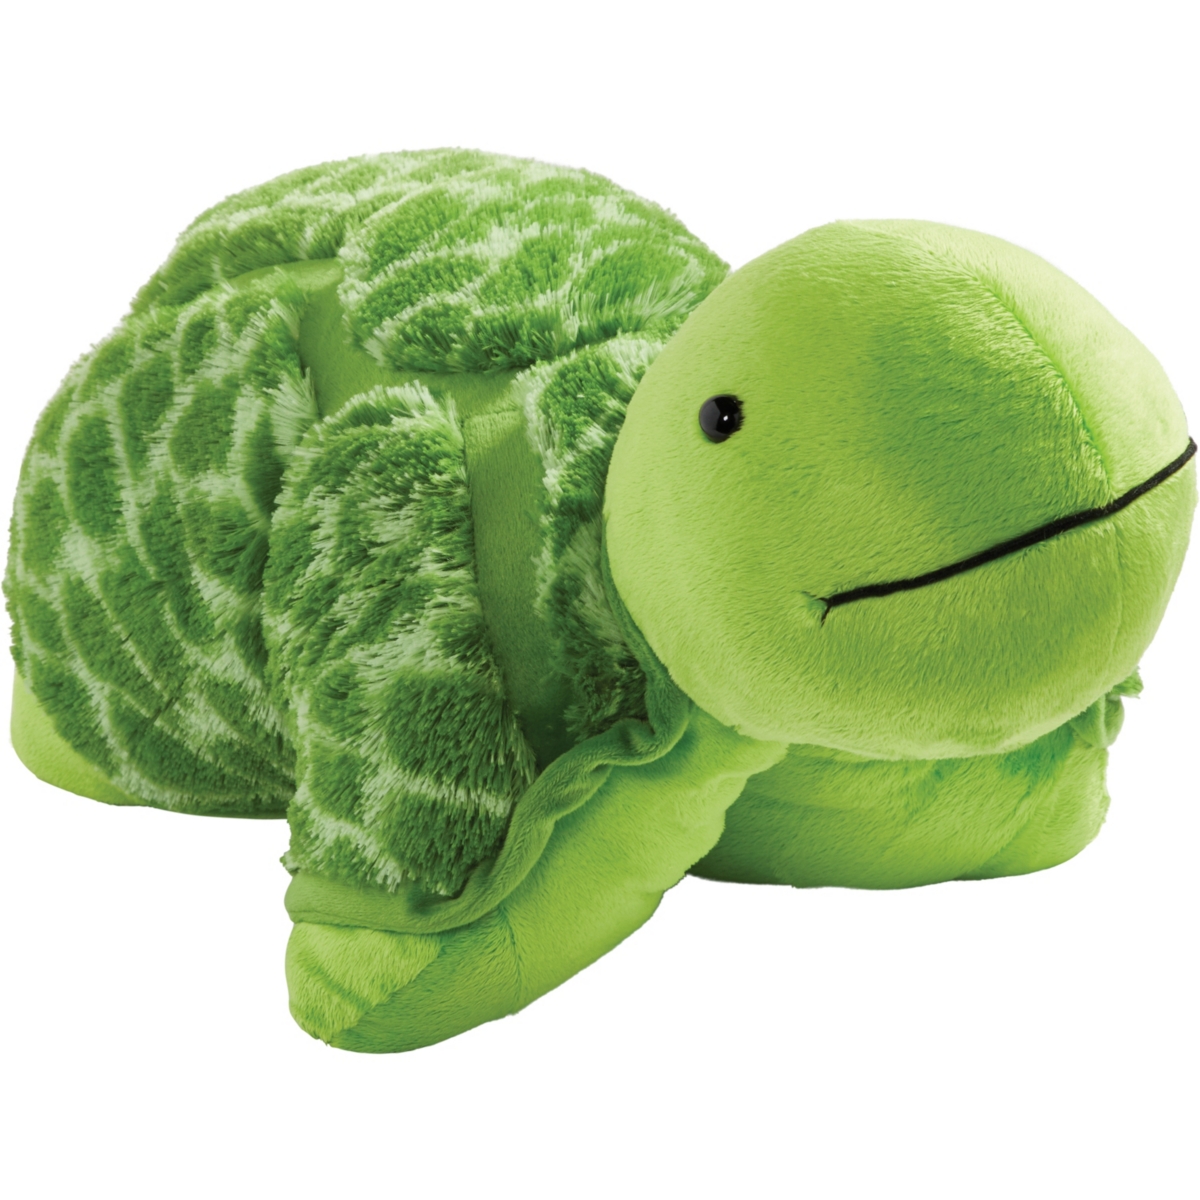 Pillow Pets Kids' Signature Teddy Turtle Stuffed Animal Plush Toy In Green